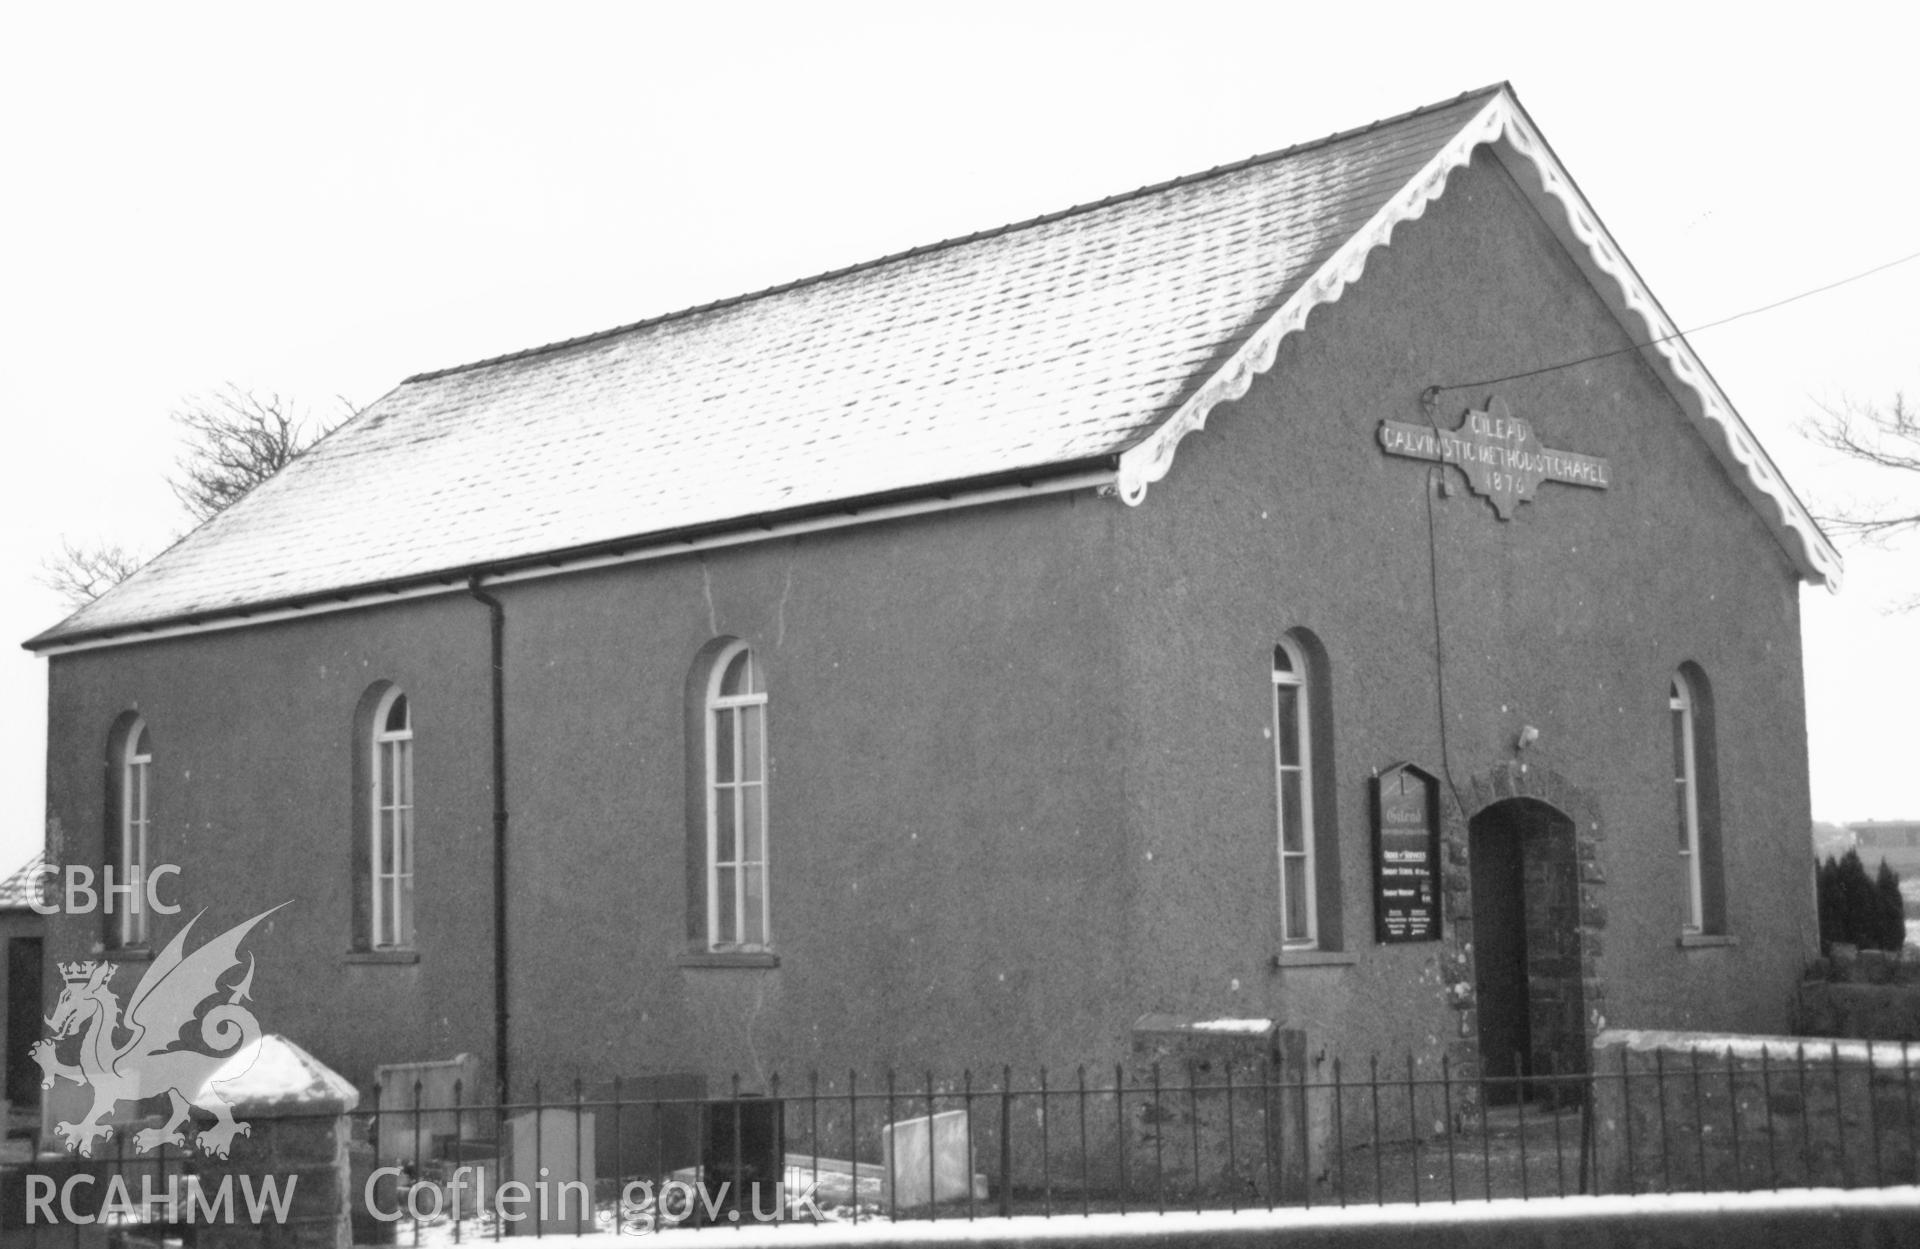 Digital copy of a black and white photograph showing an exterior view of Gilead Calvinistic Methodist Chapel, taken by Robert Scourfield, 1996.